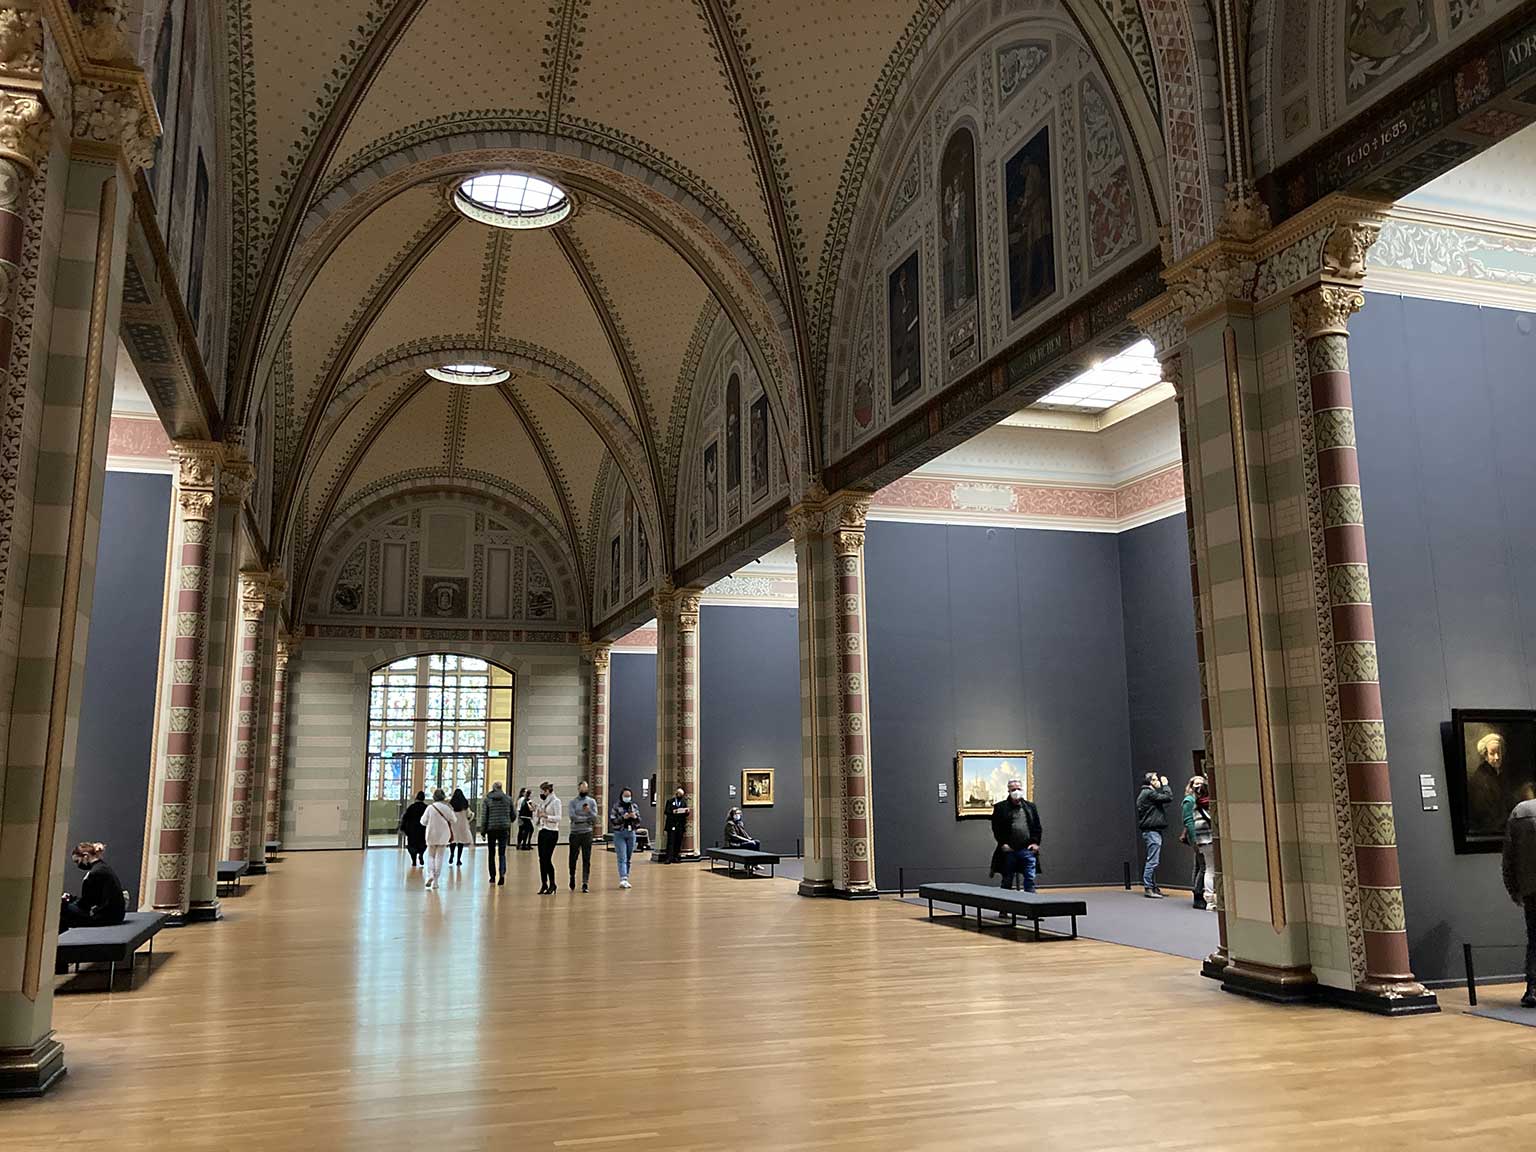 Gallery of Honor in the Rijksmuseum, Amsterdam, seen in southern direction